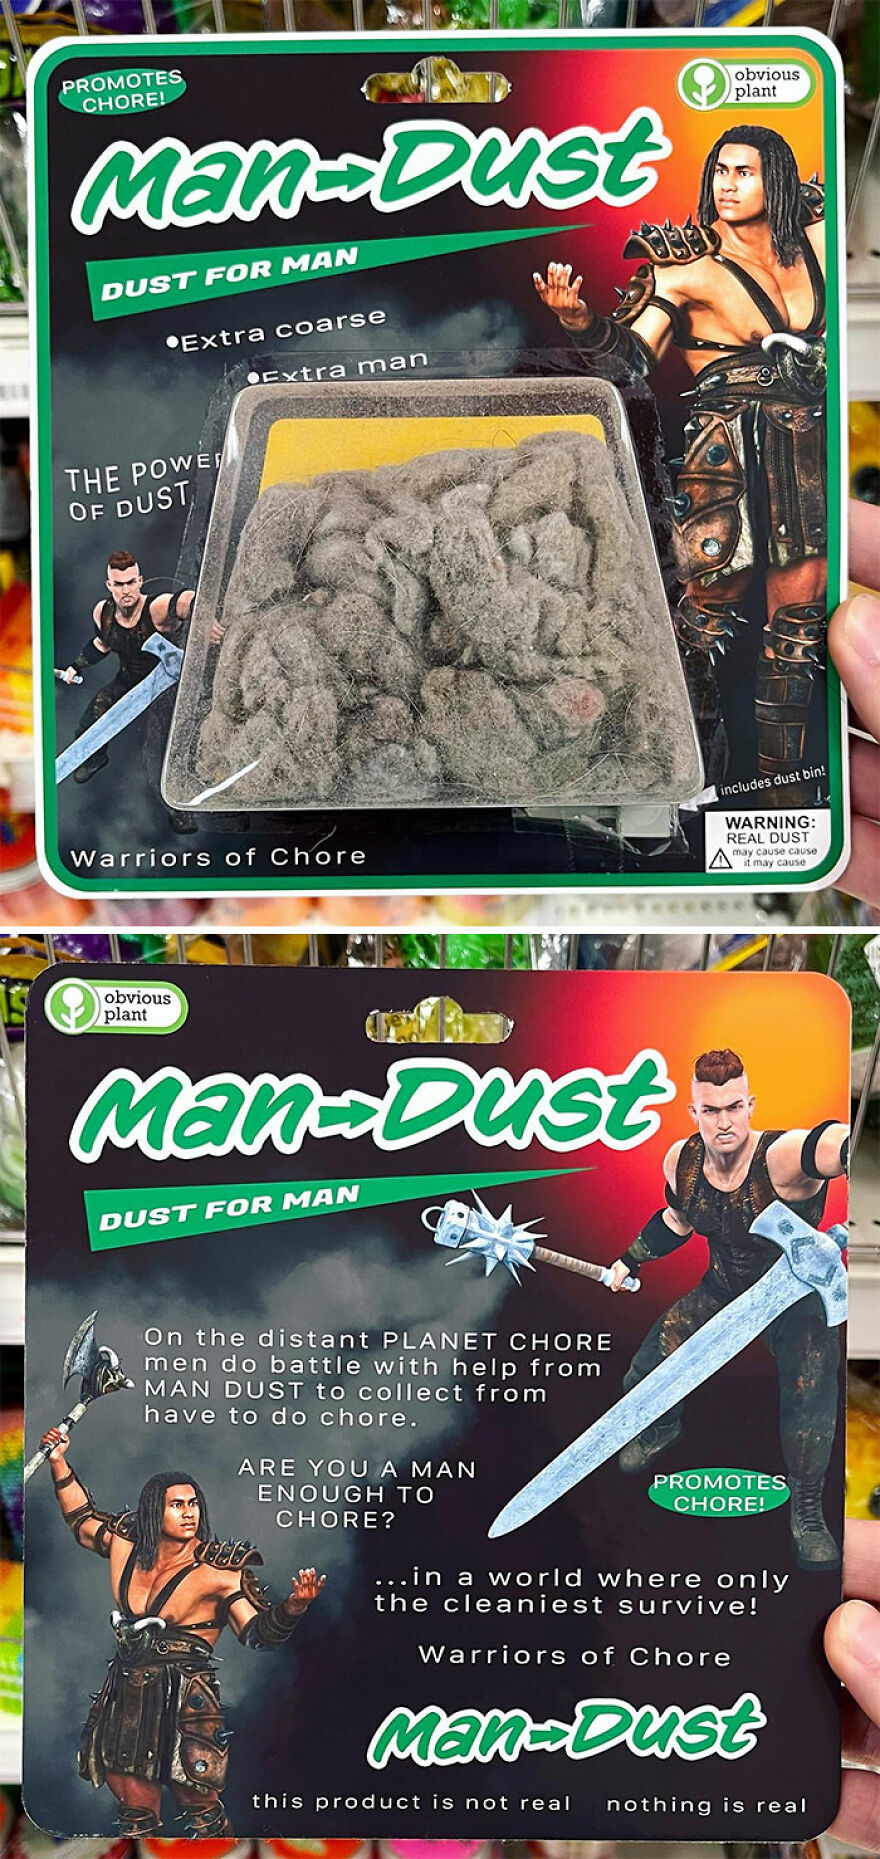 Obvious Plant Fake Products